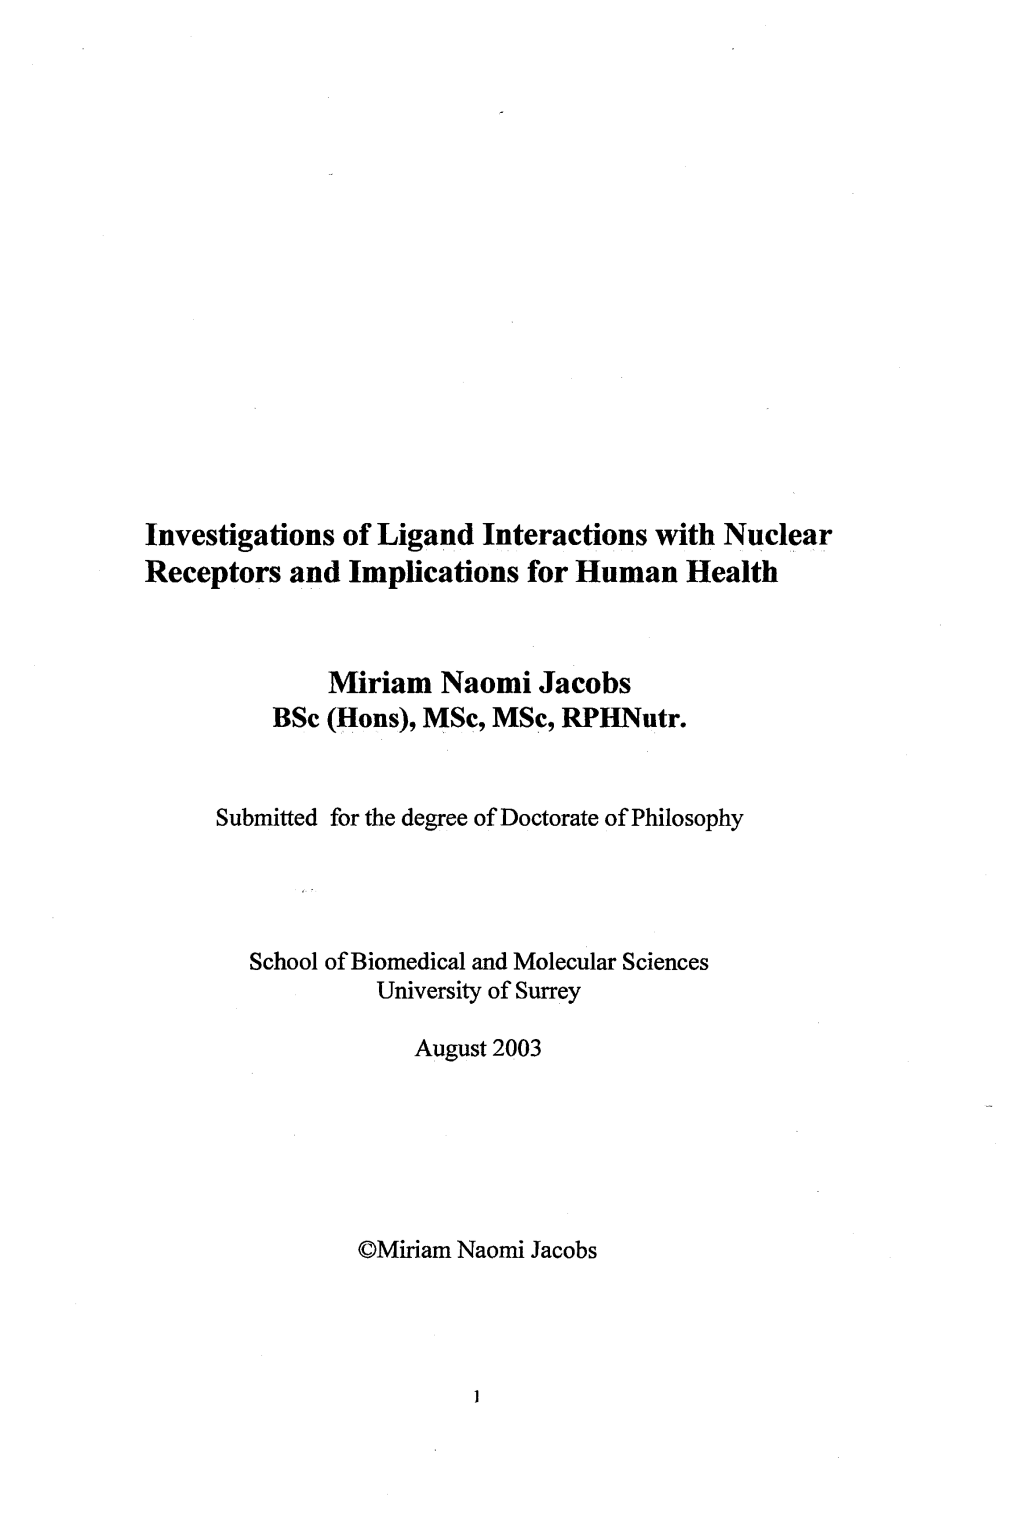 Investigations of Ligand Interactions with Nuclear Receptors and Implications for Human Health